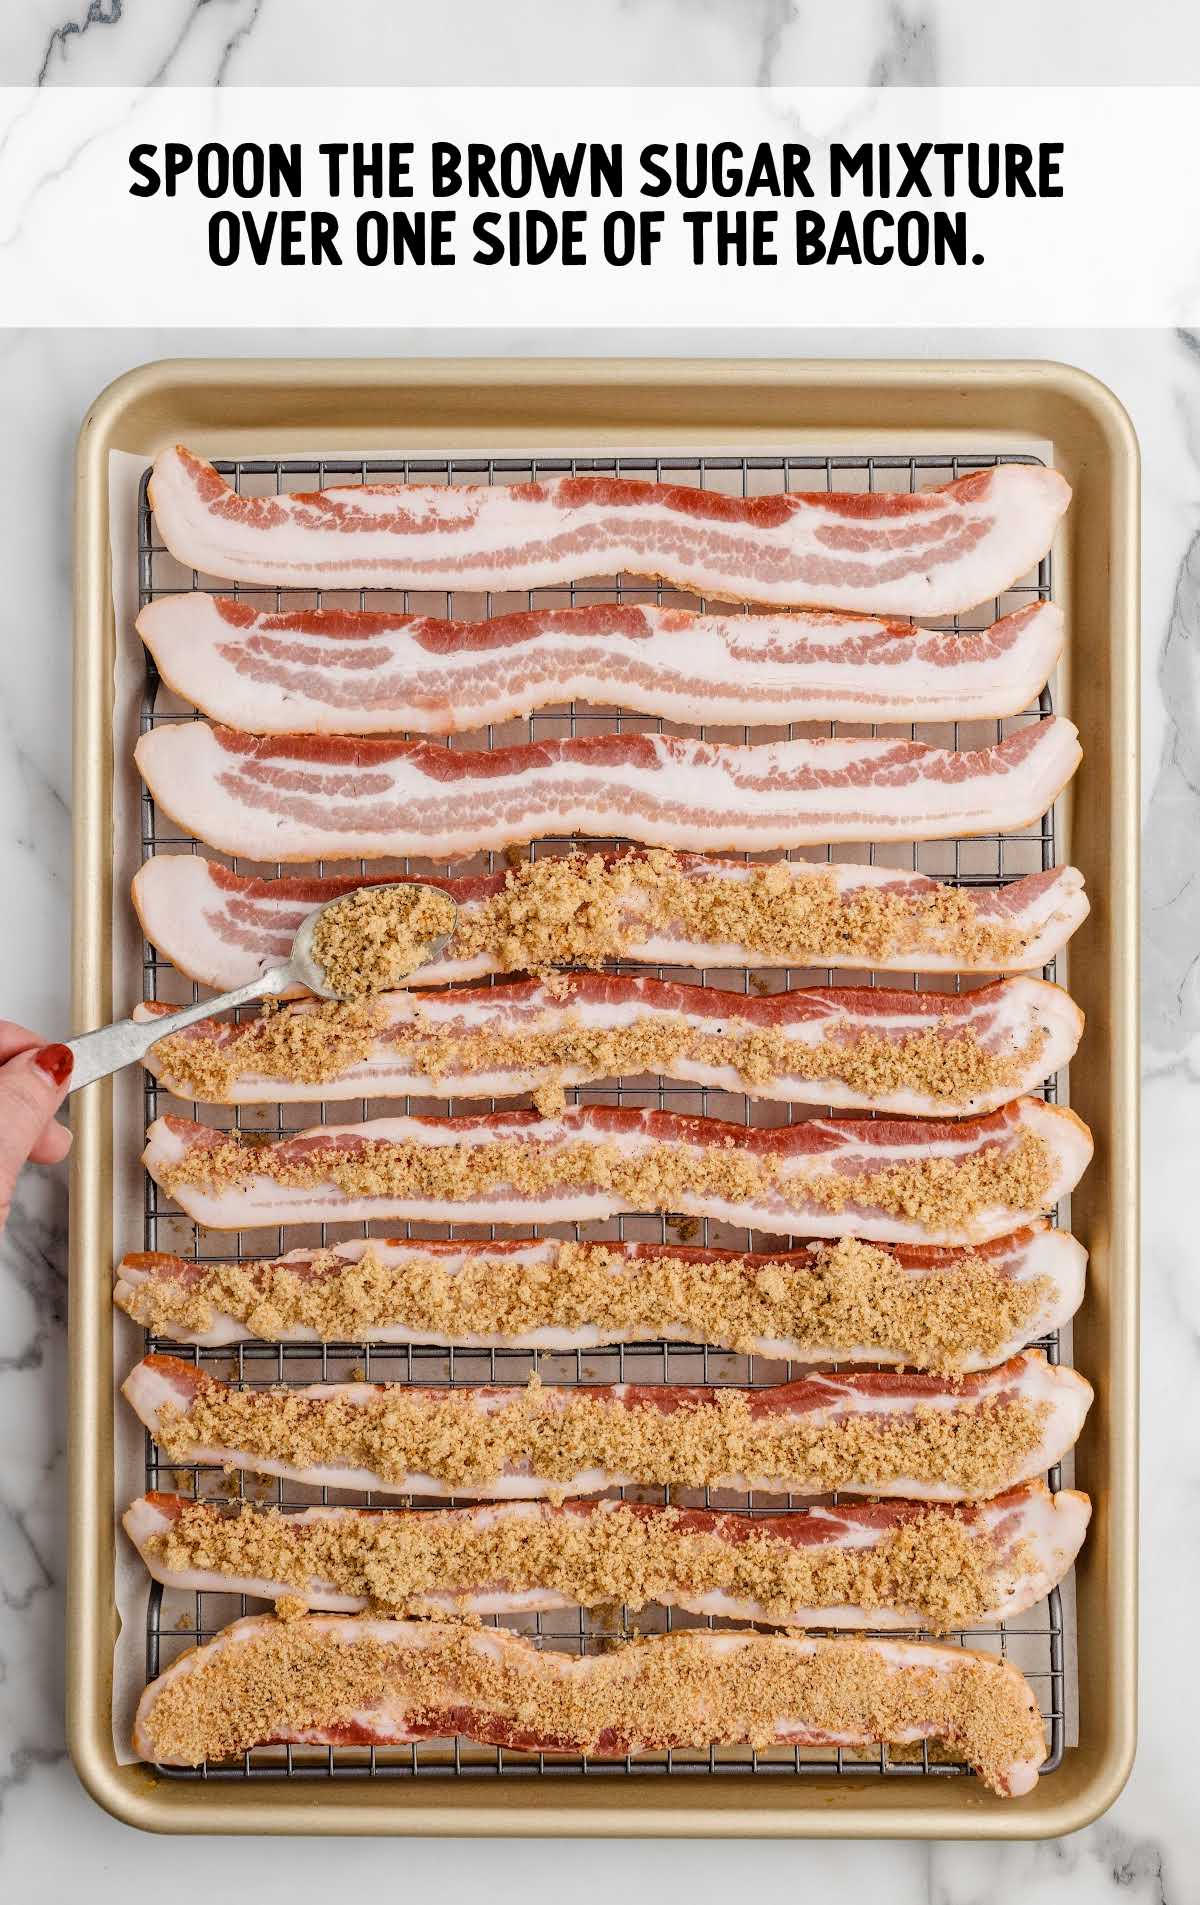 brown sugar mixture spooned on top of the bacon